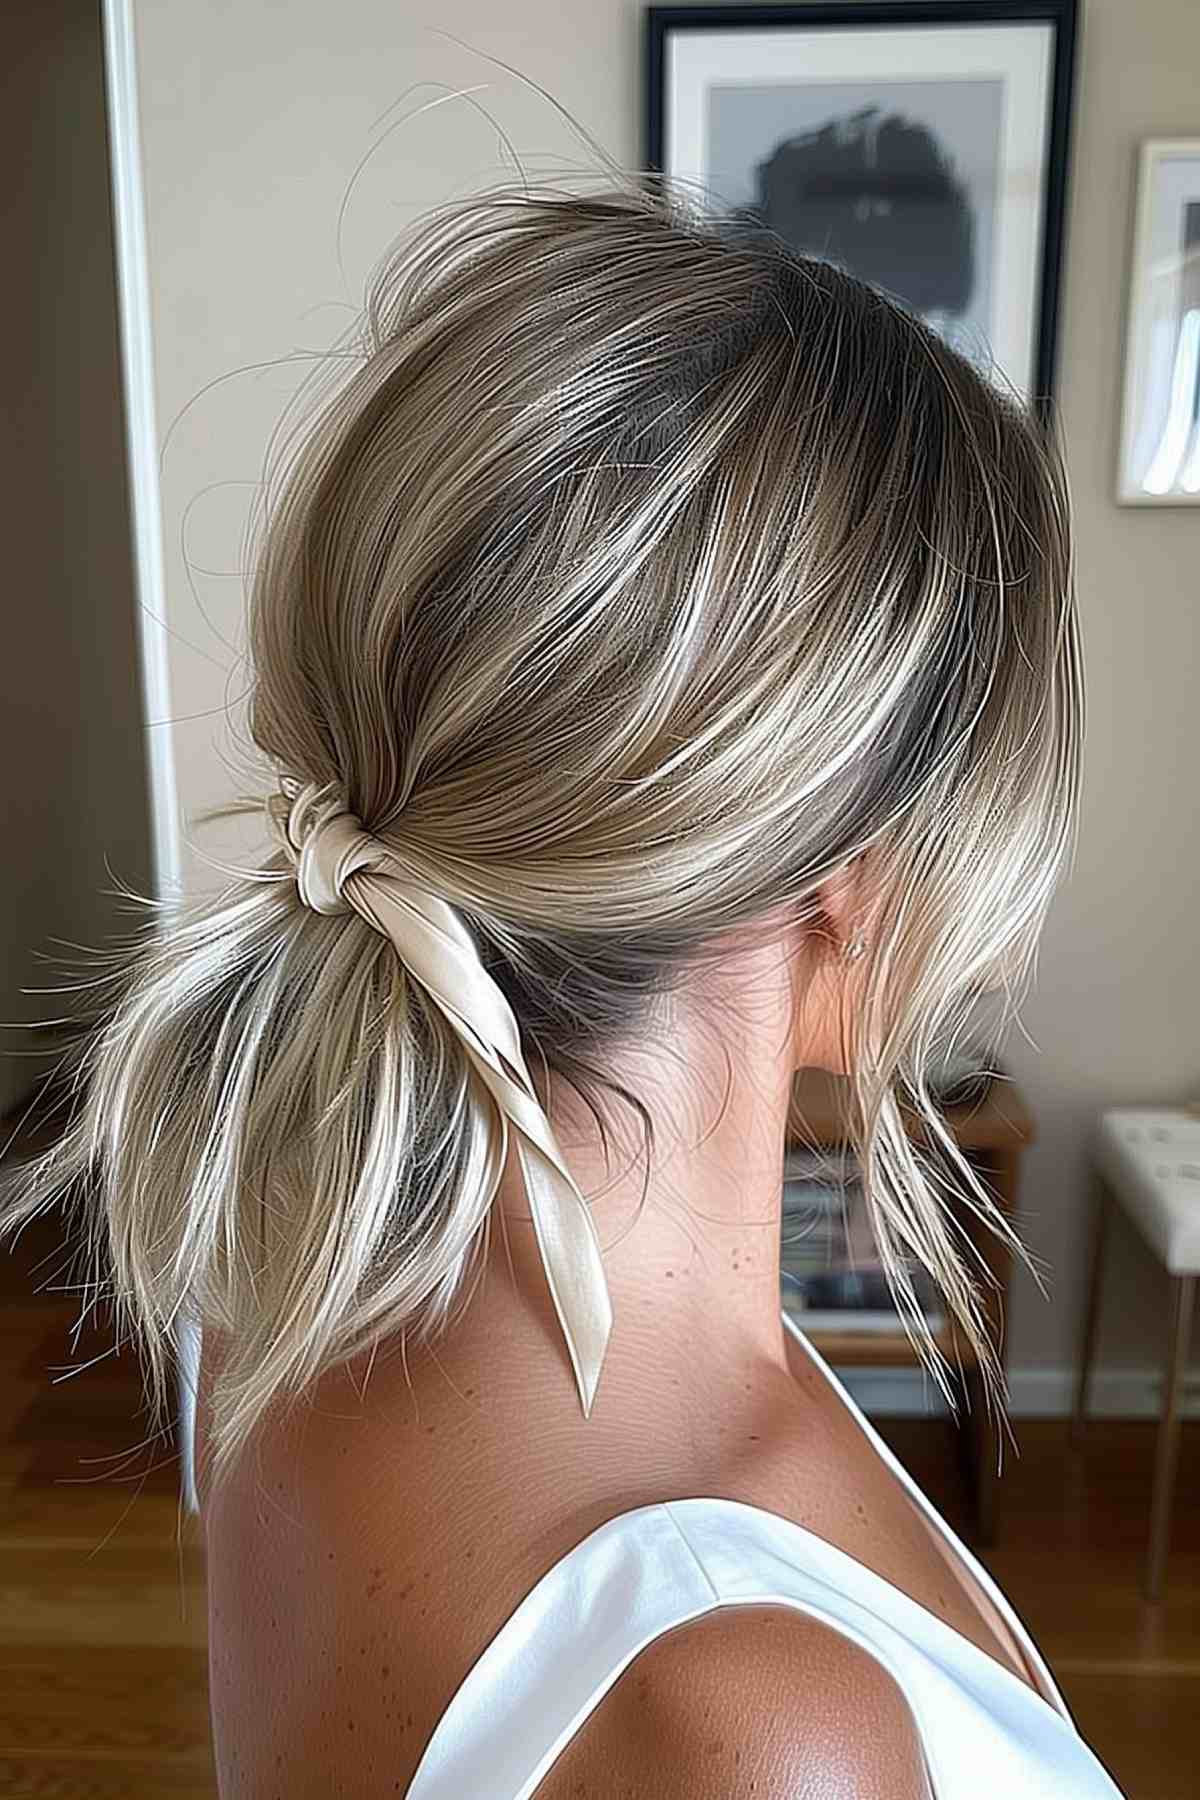 Casual yet stylish loose low ponytail secured with a creamy satin ribbon, ideal for a relaxed yet fashionable look.